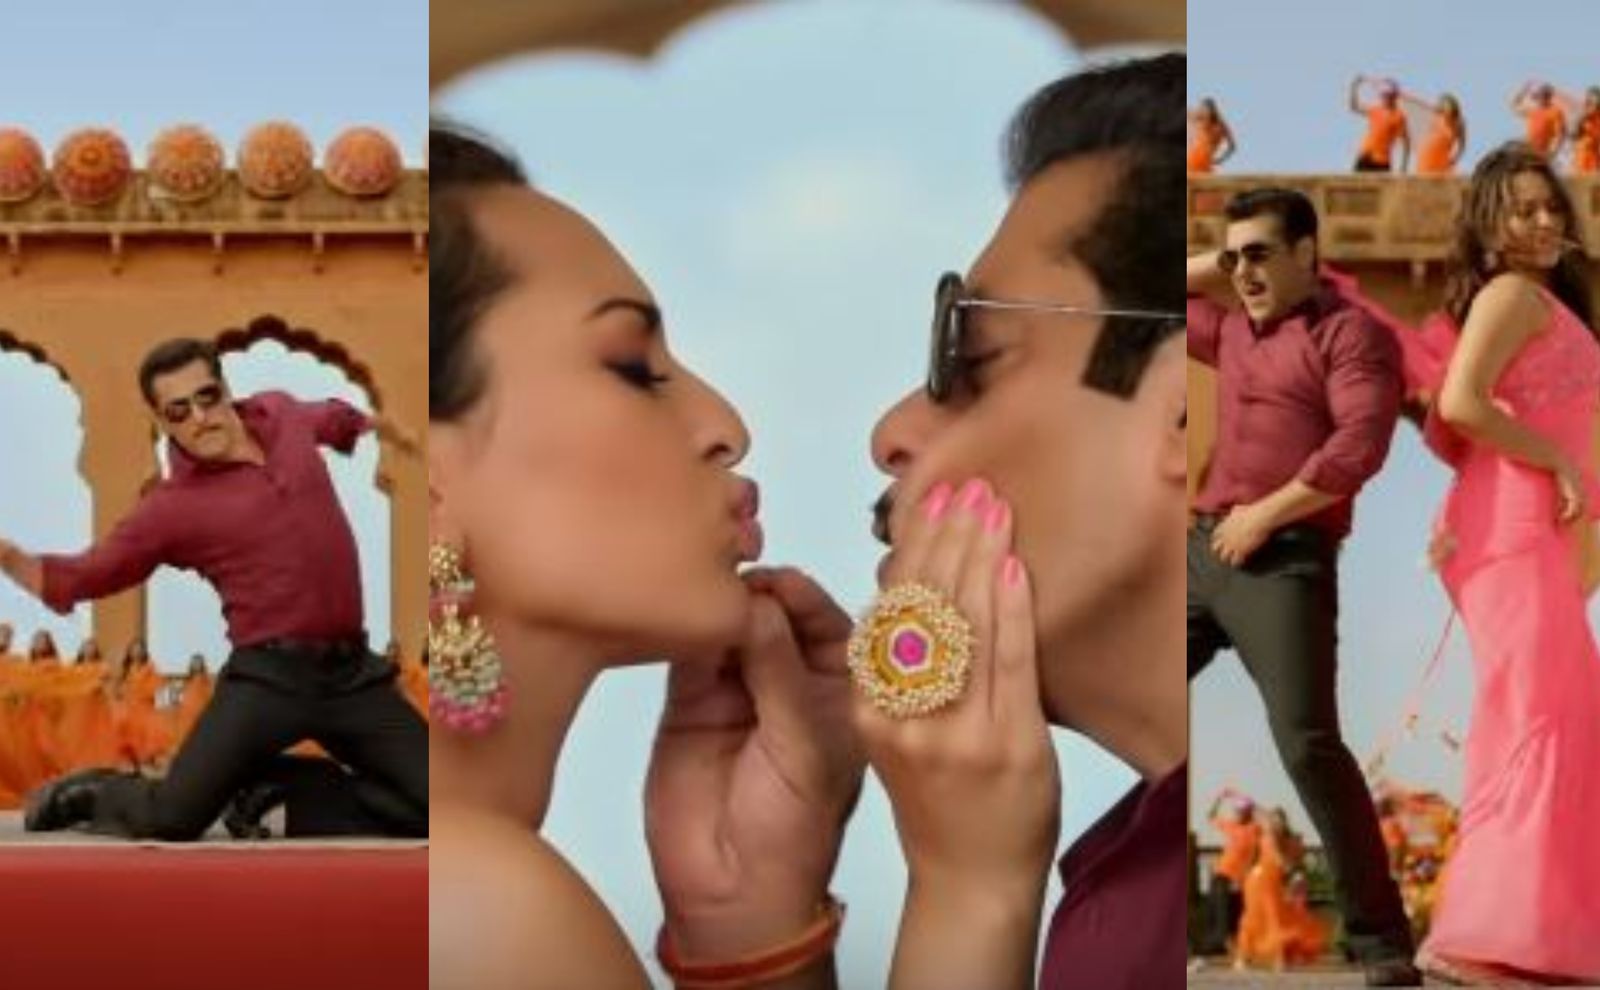 Dabangg 3 Song Yu Karke: Salman-Sonakshi Dances Like There's No Tomorrow In This Rather Cringy Song With Too Much Pout Face